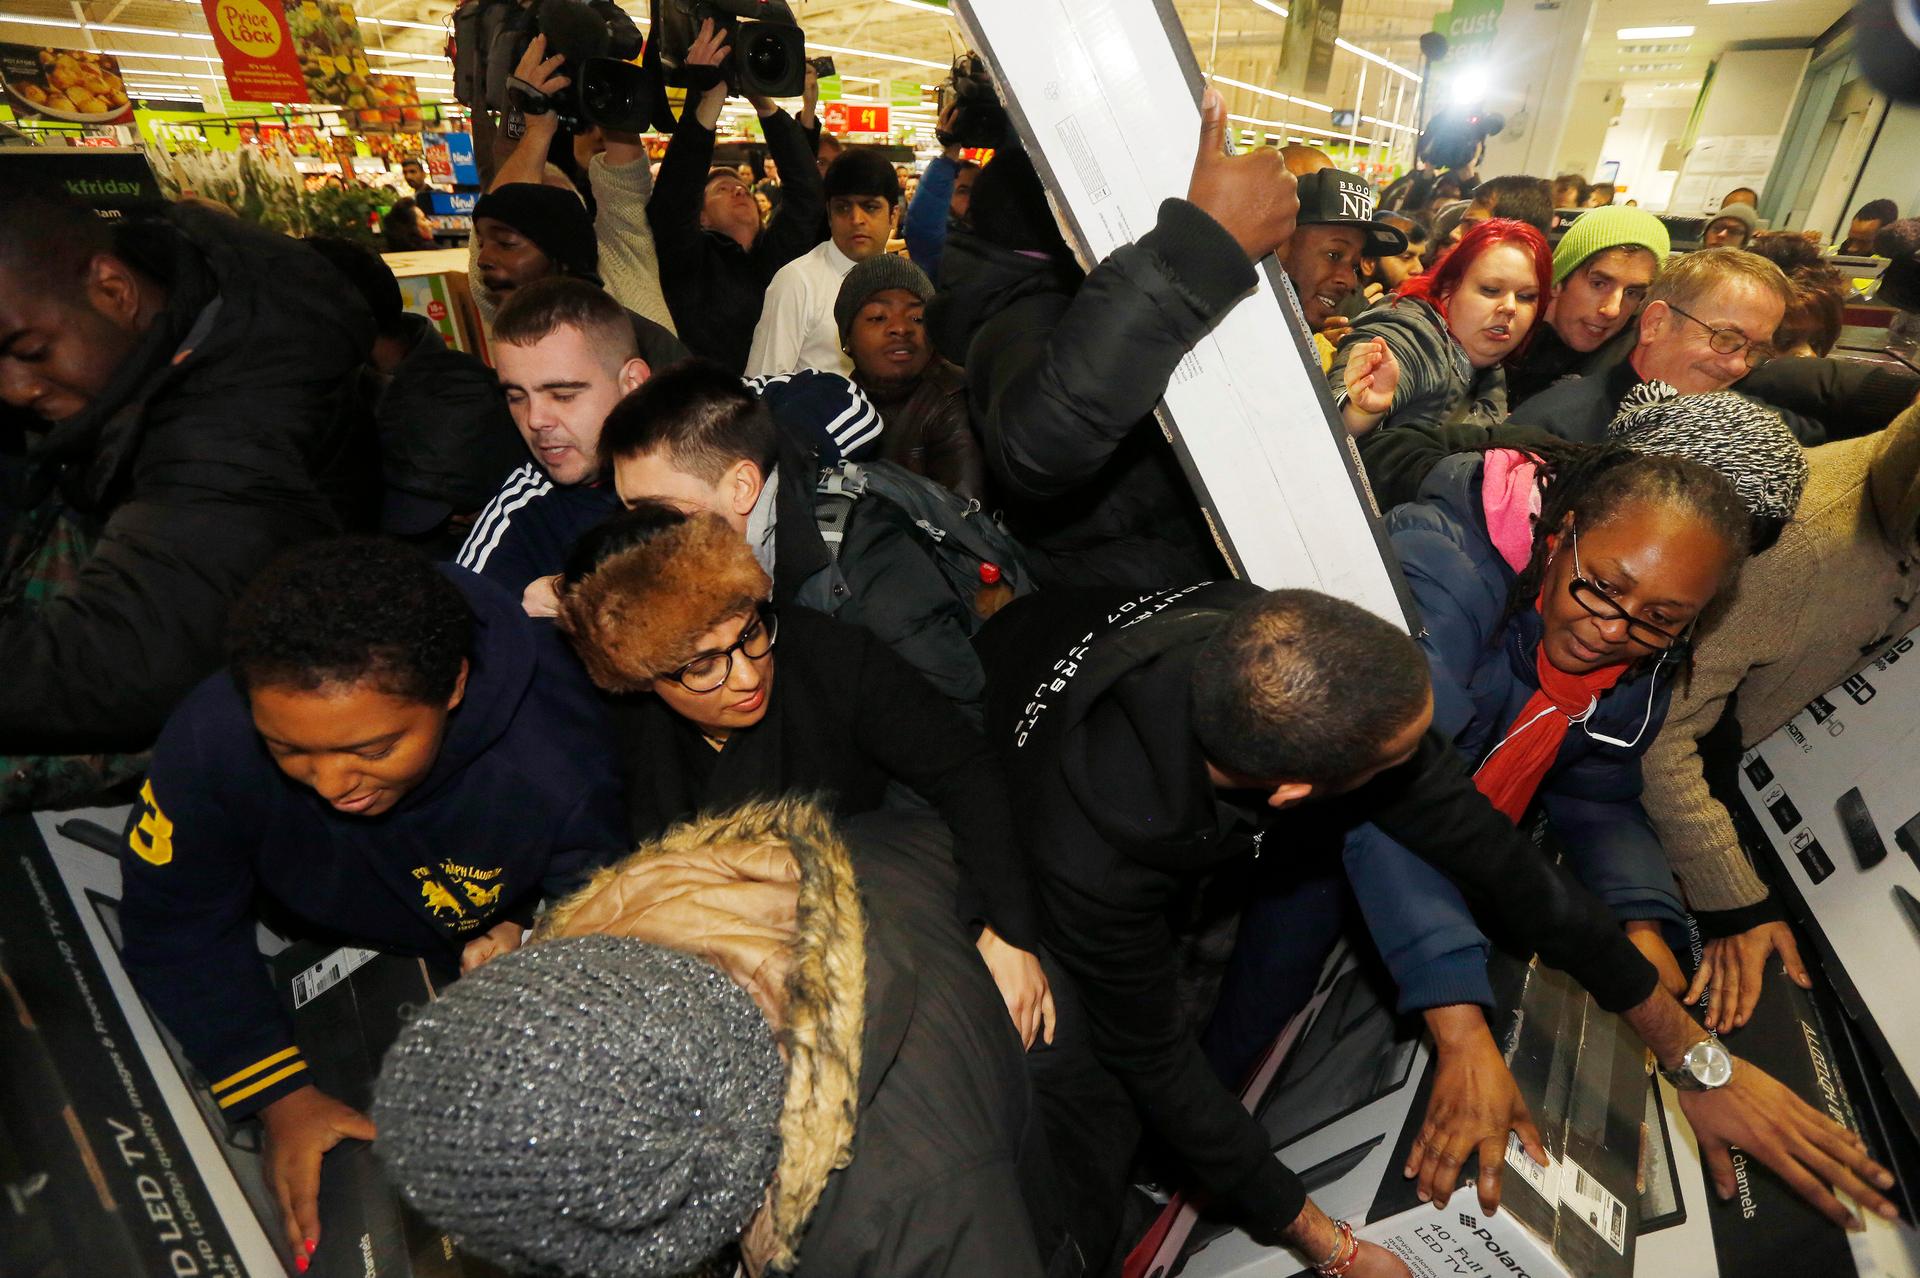 Shoppers compete to purchase retail items on "Black Friday" at an Asda superstore in Wembley, north London November 28, 2014. 